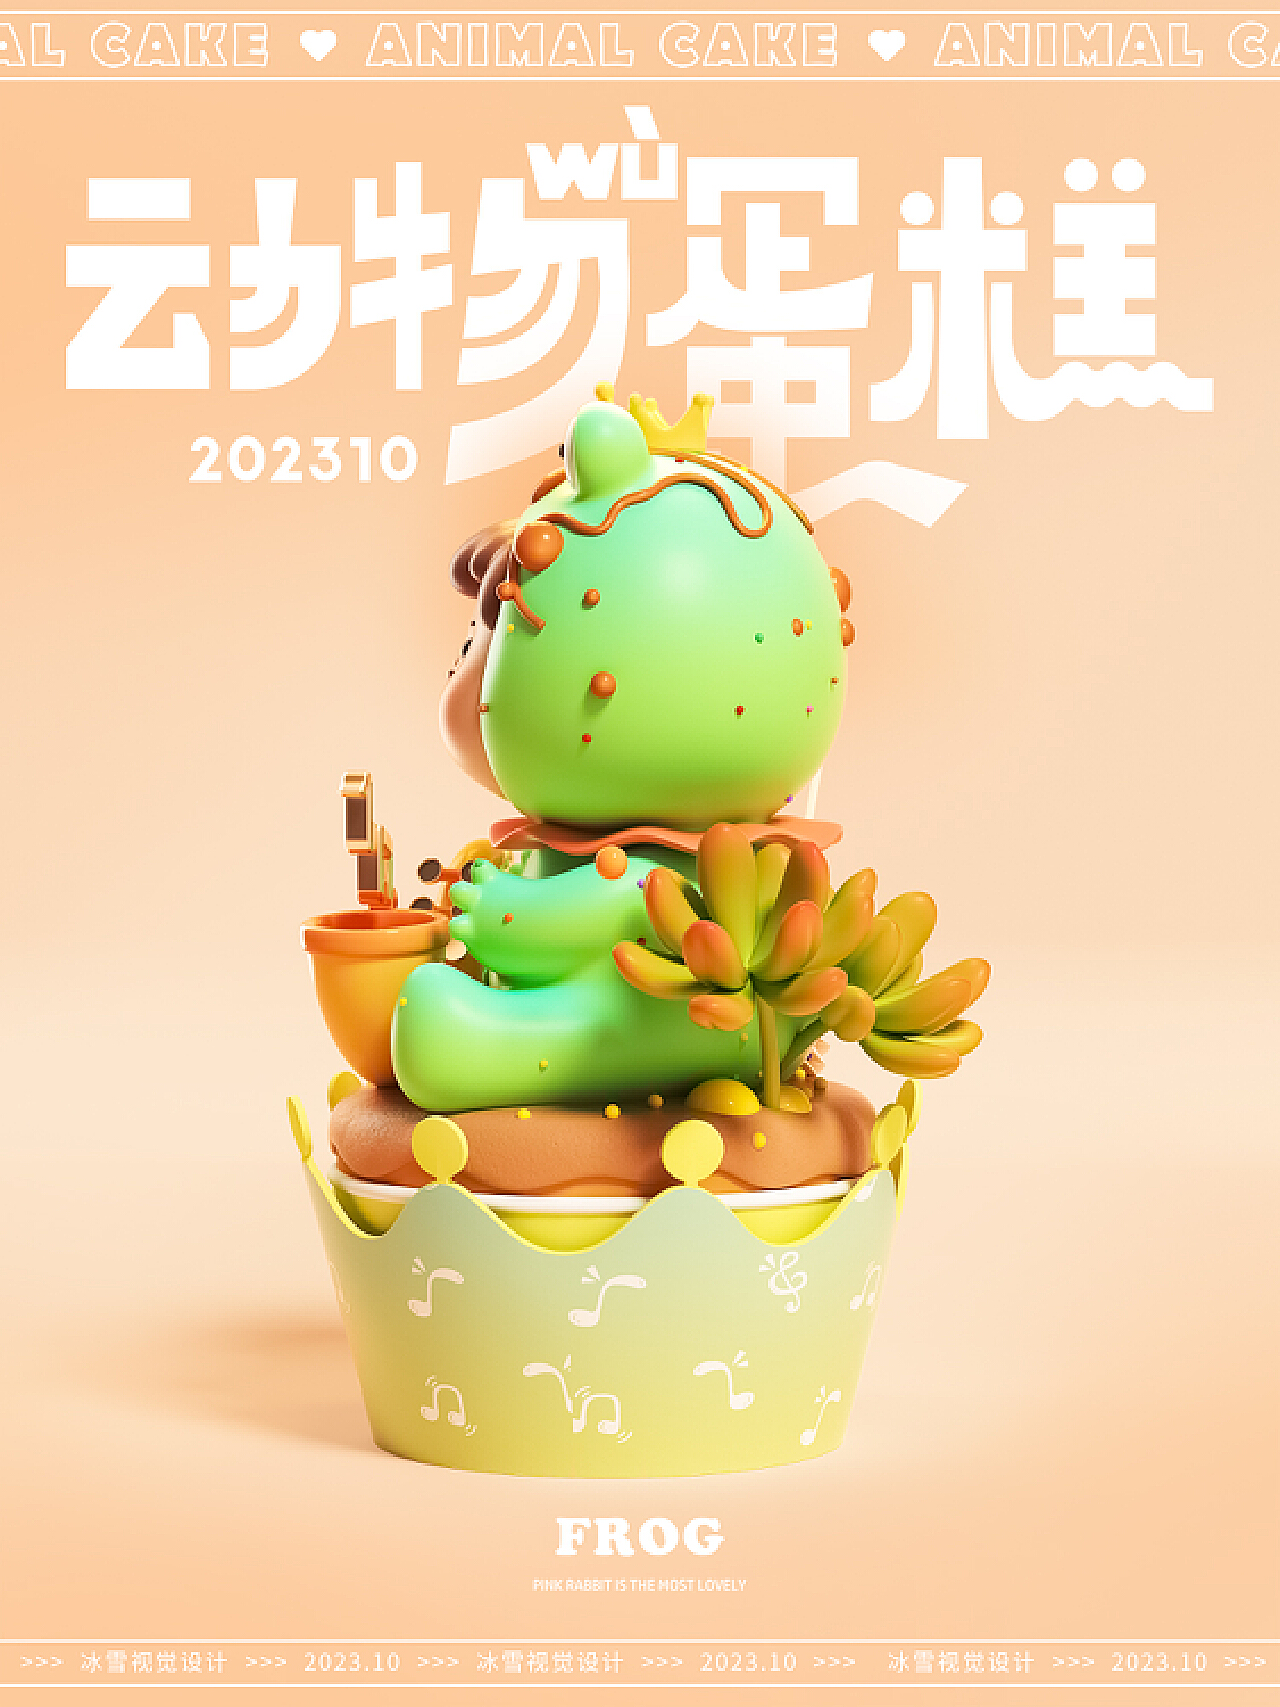 Free Images : sweet, cute, green, frog, amphibian, colorful, candle, toy, happy birthday ...